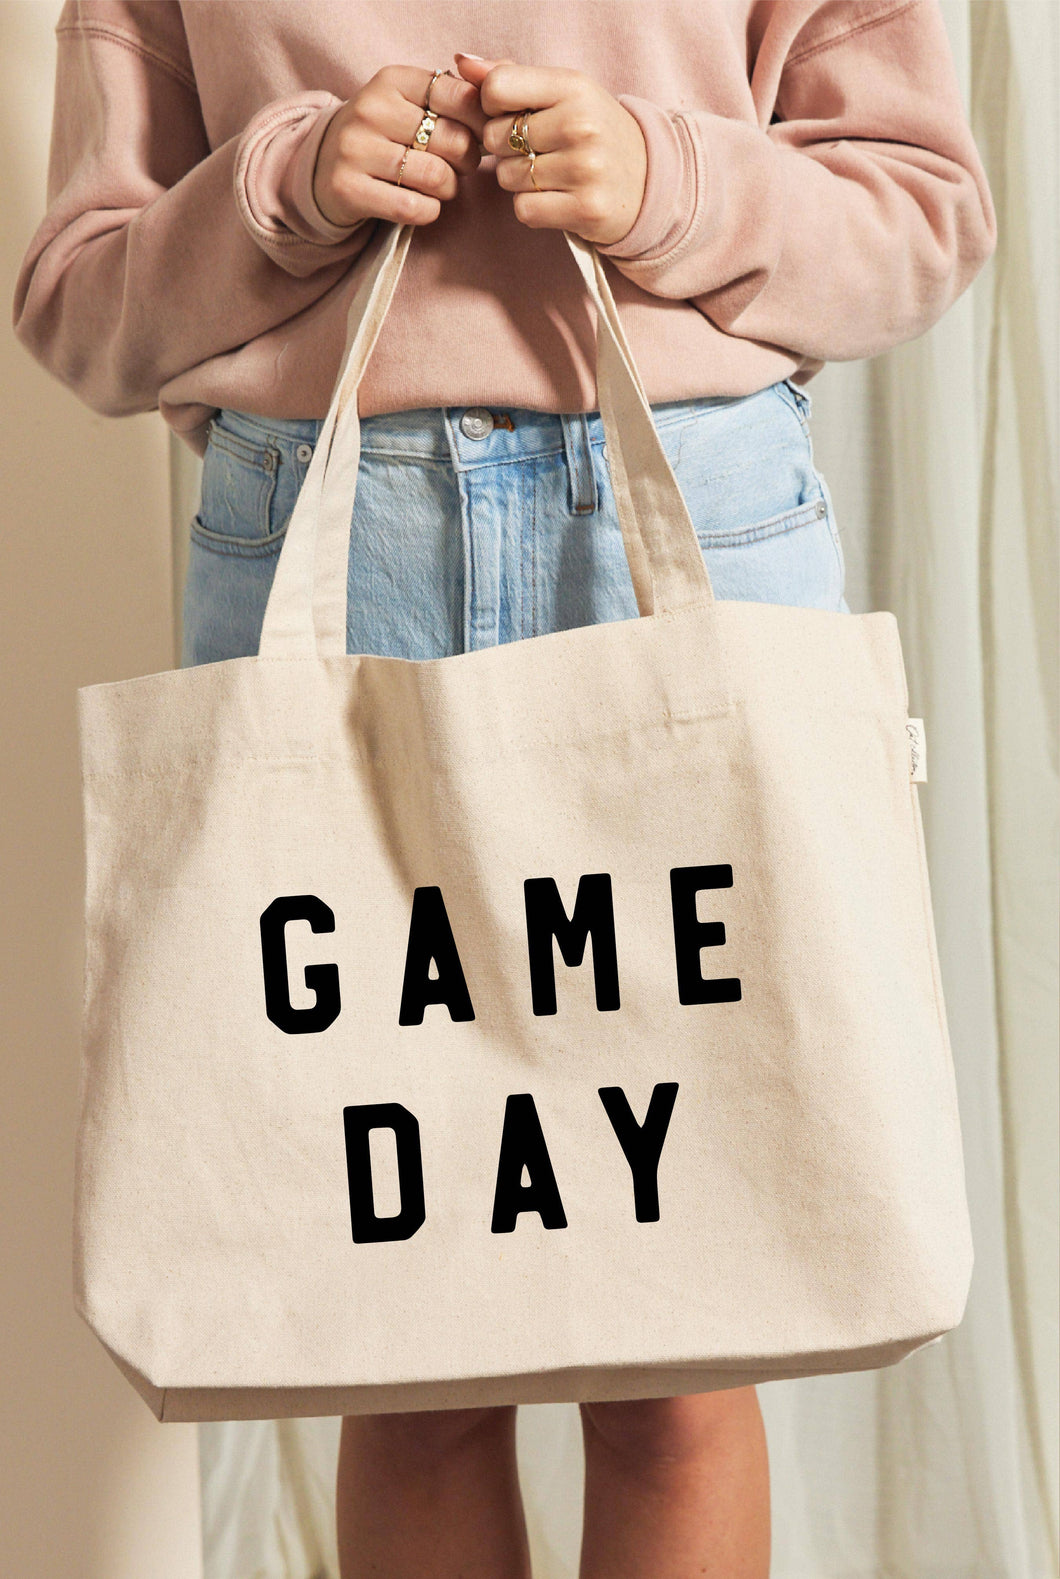 GAME DAY Canvas Tote Bag